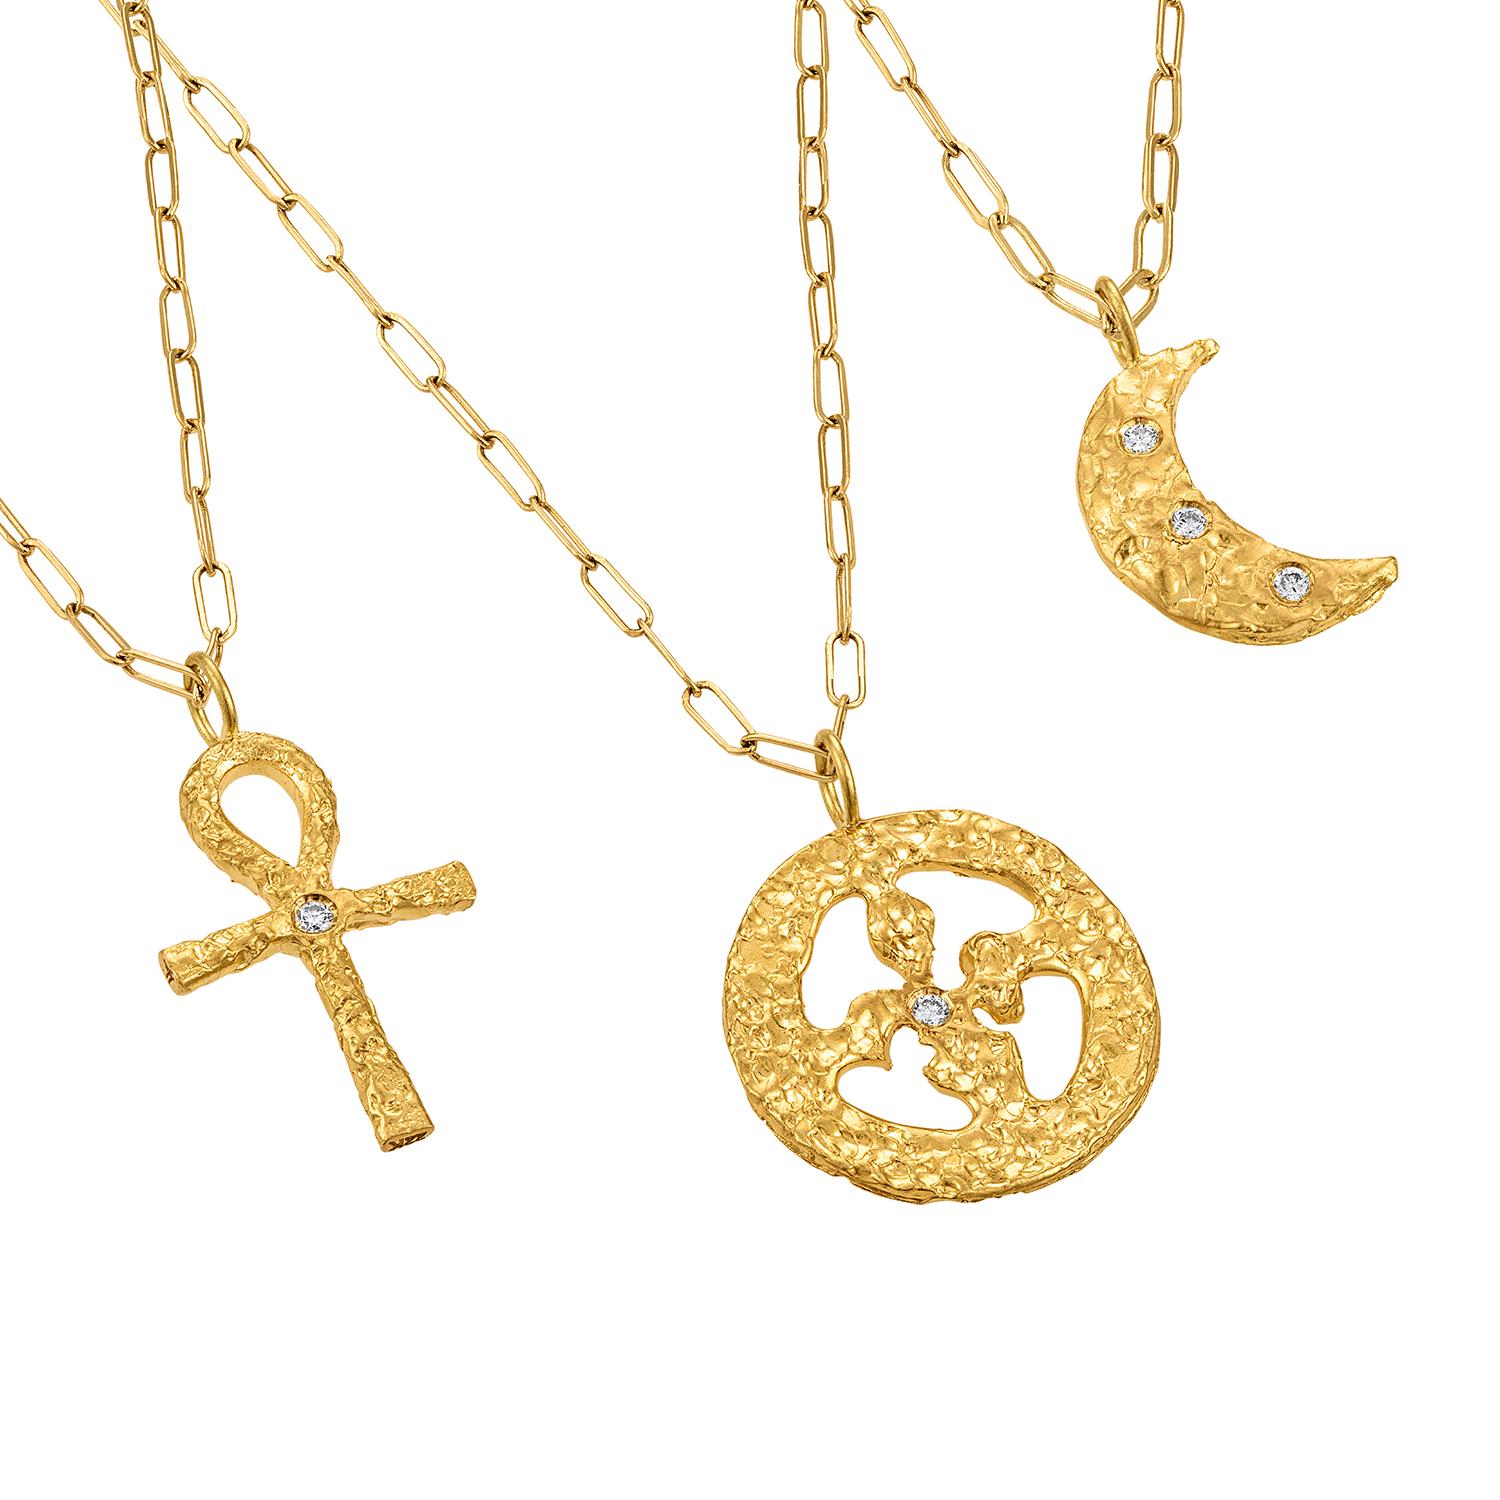 This exquisite diamond Crescent Moon Mini Pendant is a stunning piece that combines modern design with timeless elegance. It is a unique meaningful piece of jewelry. Handmade from solid 22k gold and features a crescent moon symbol, The Moon is